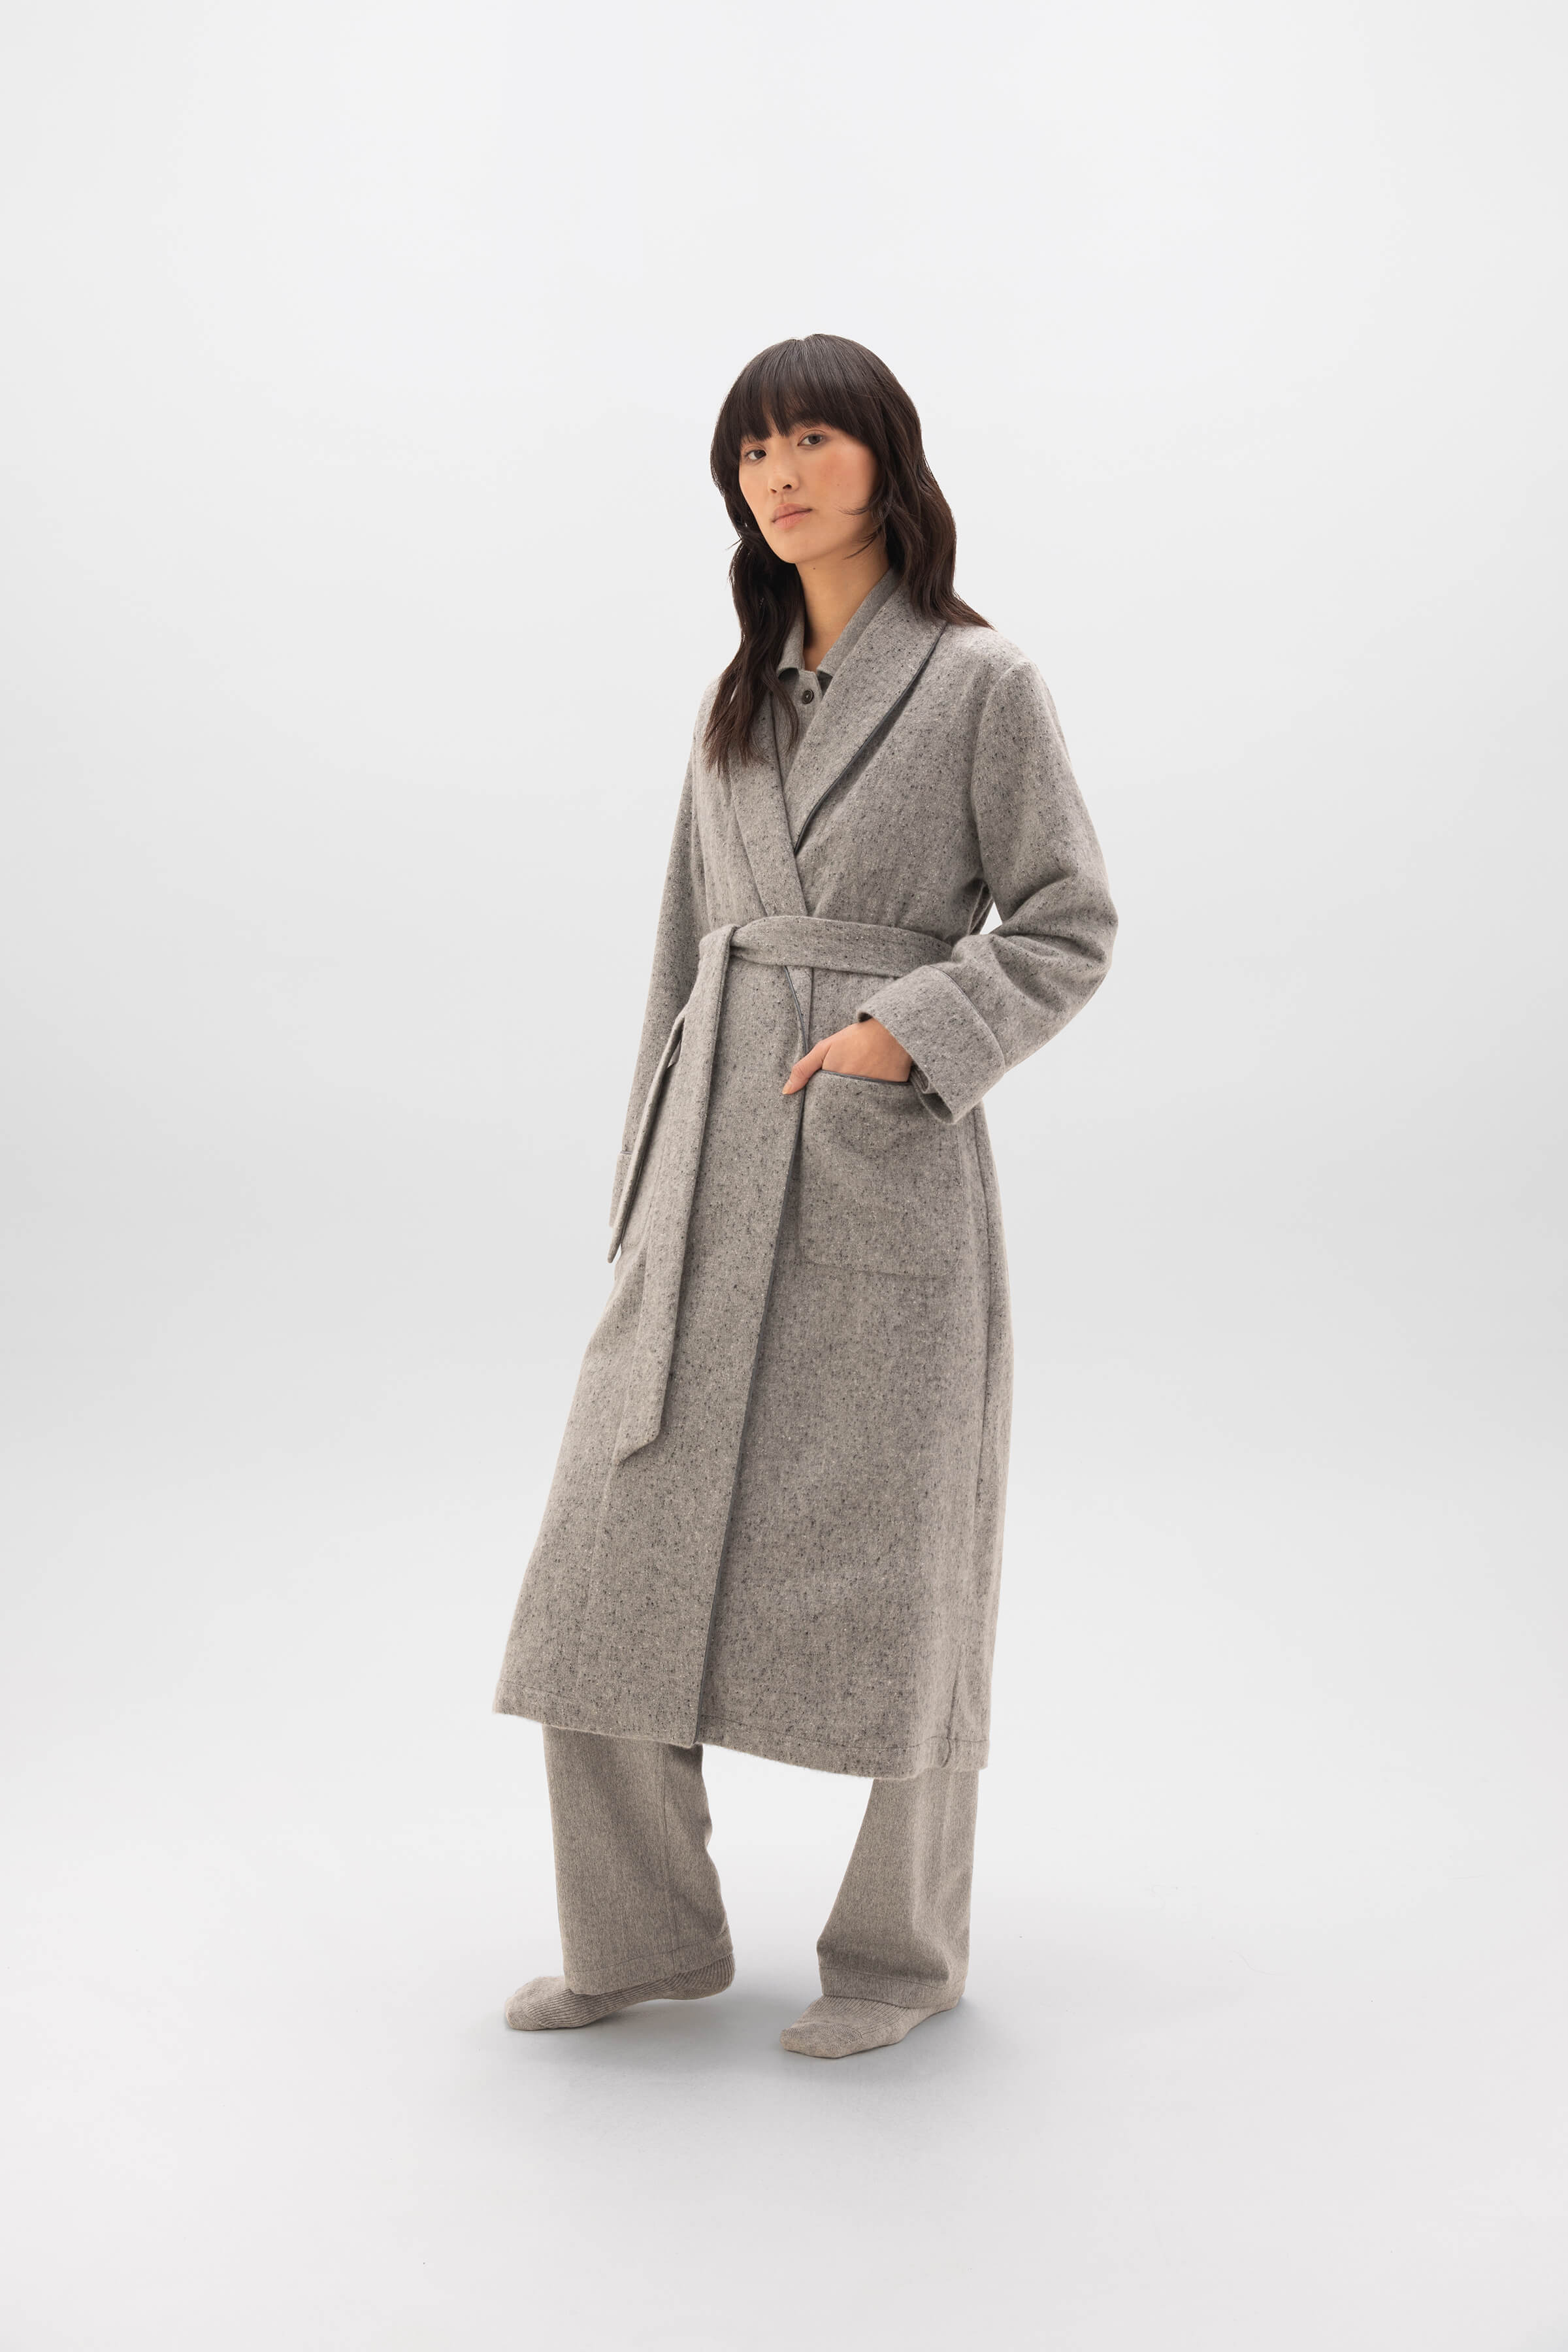 Buy Hellomamma Women Long Robes Soft Fleece Winter Warm Housecoats Womens  Bathrobe Dressing Gown Sleepwear Pajamas Top Light Gray Online at Low  Prices in India - Amazon.in